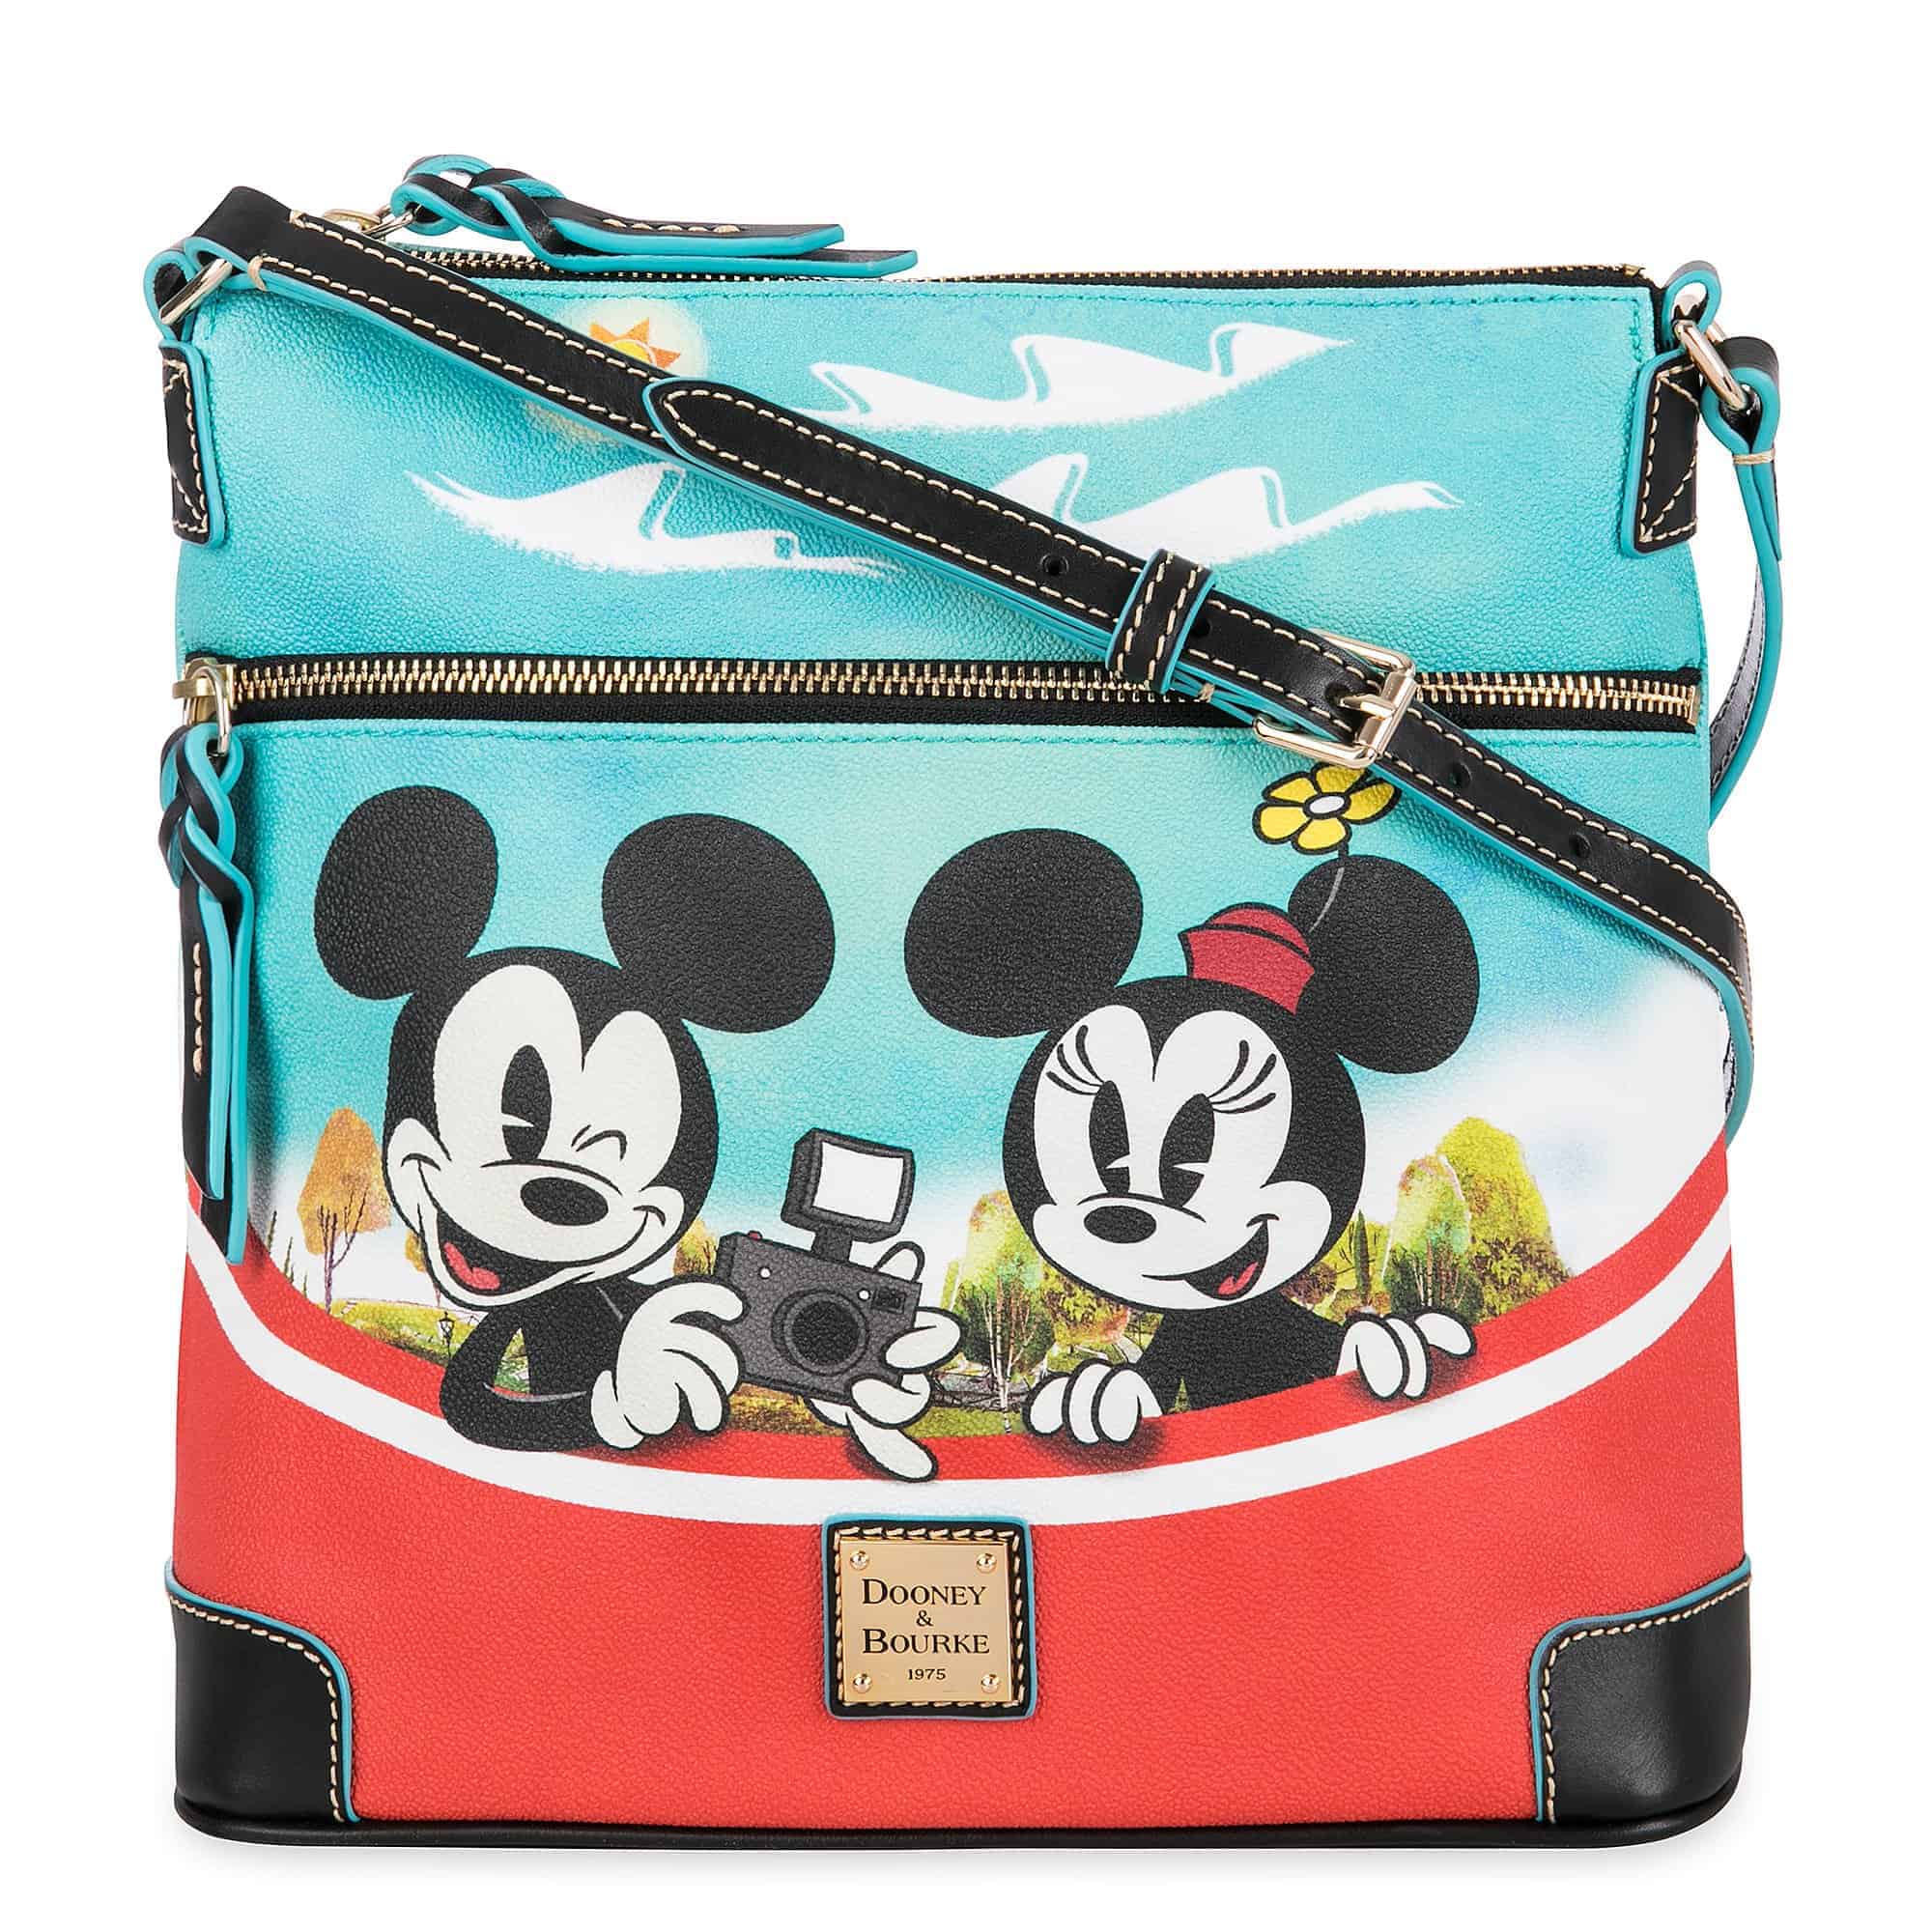 Mickey Mouse and Friends Skyliner Crossbody Bag by Dooney & Bourke